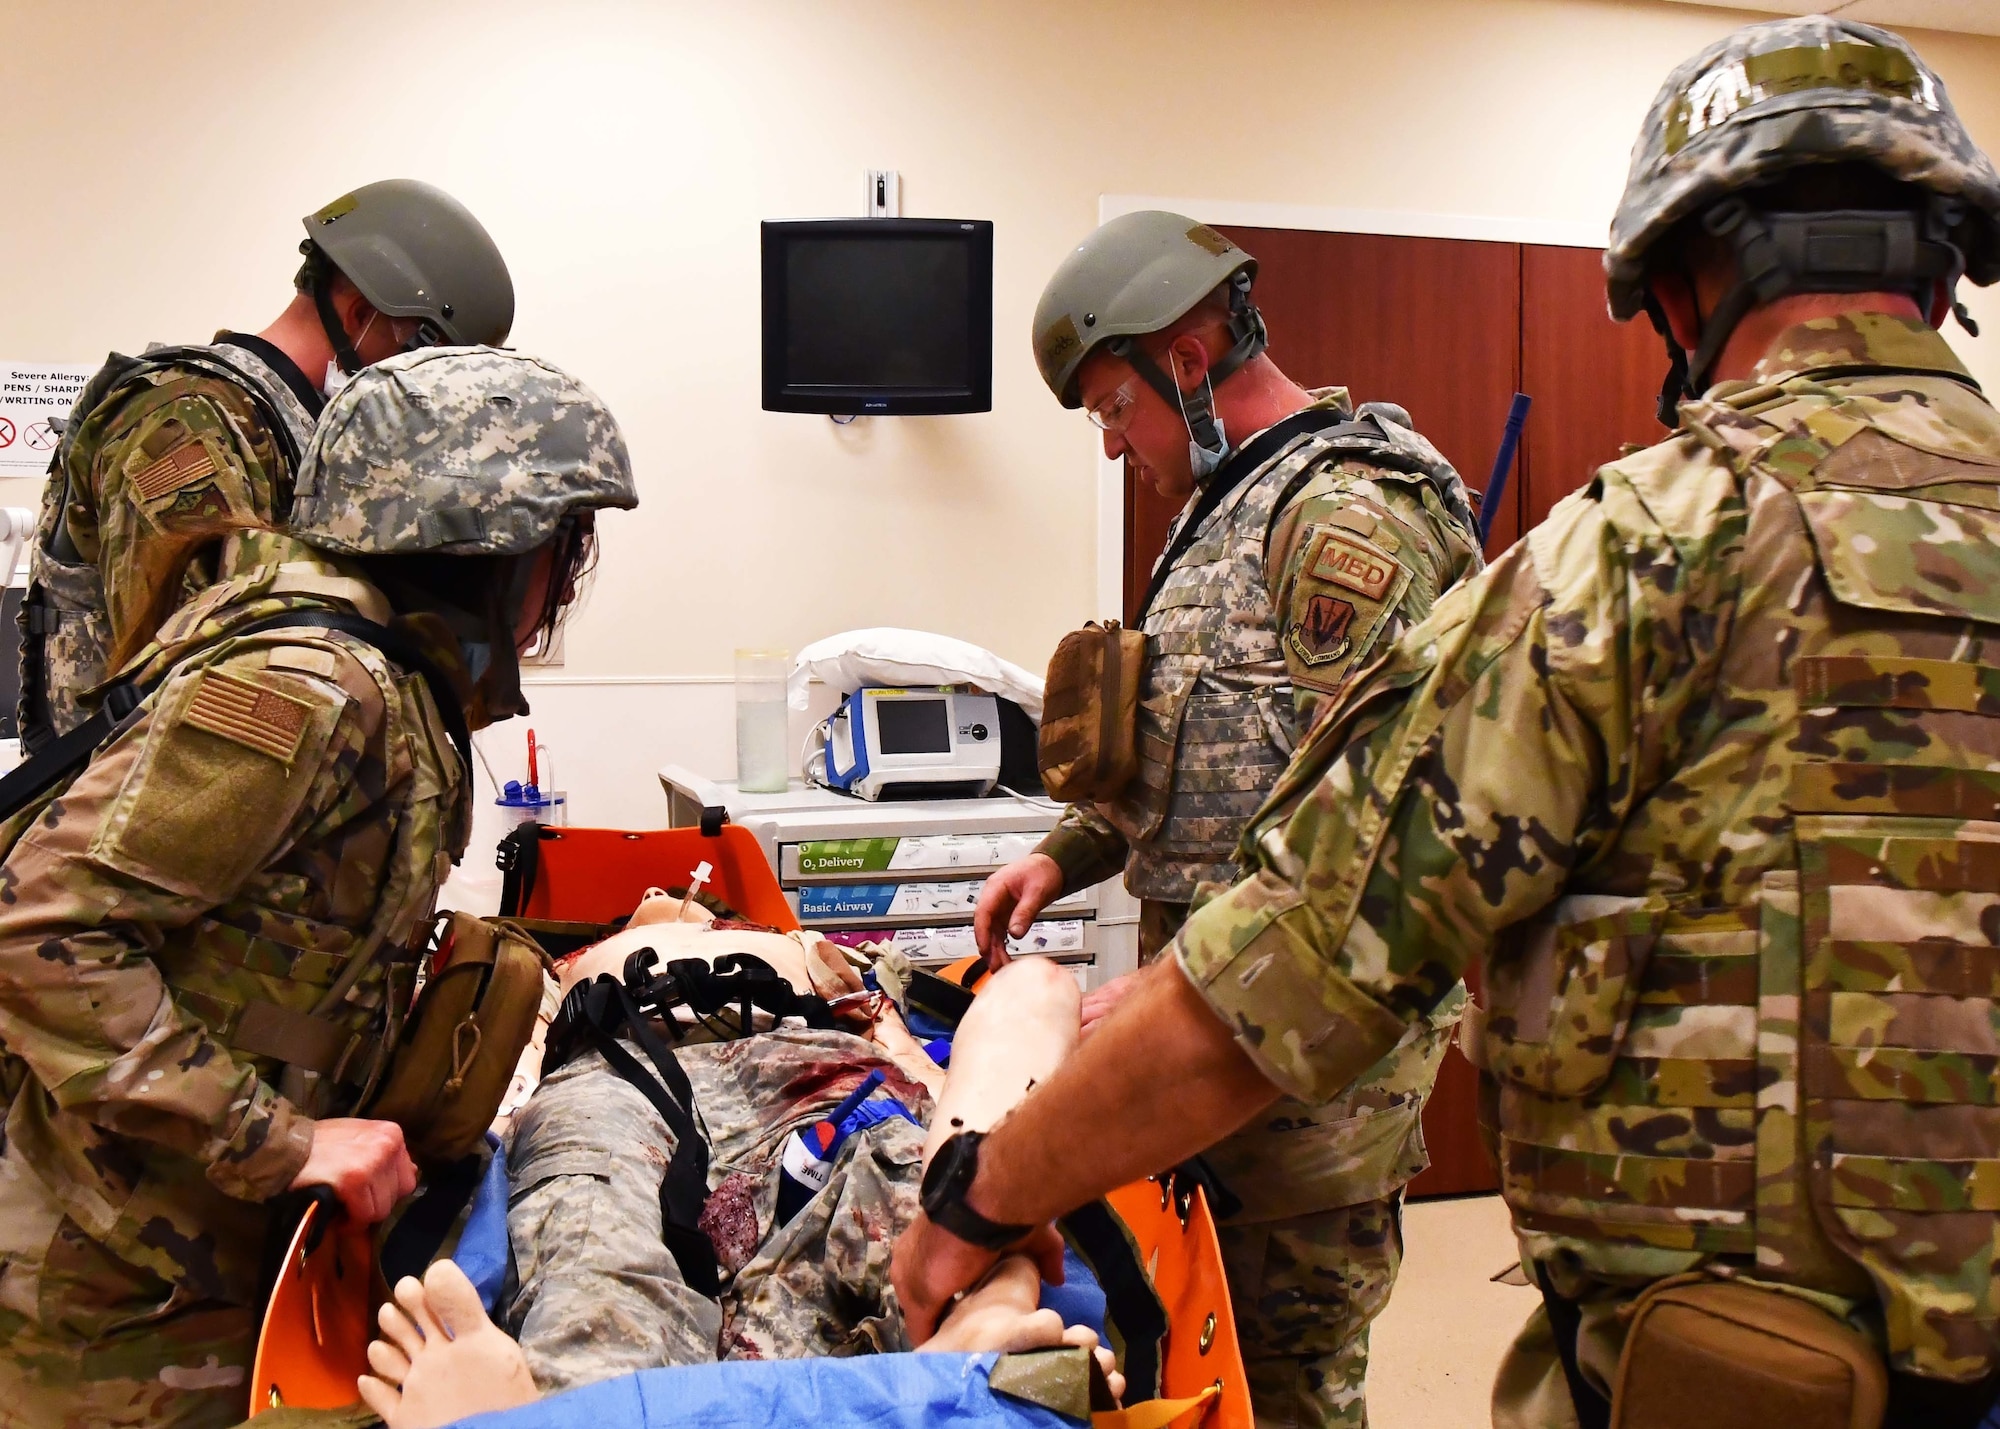 Medics and nurses from the 104th Medical Group went through a training to receive their Tactical Combat Casualty Care certificates Sept. 18-19, 2021, at the Hartford Hospital Center for Education, Simulation, and Innovation, in Hartford, Conn. The training focused on evidence-based, life-saving techniques and strategies for providing the best trauma care on the battlefield.  (U.S Air National Guard Photos by Staff Sgt. Sara Kolinski)